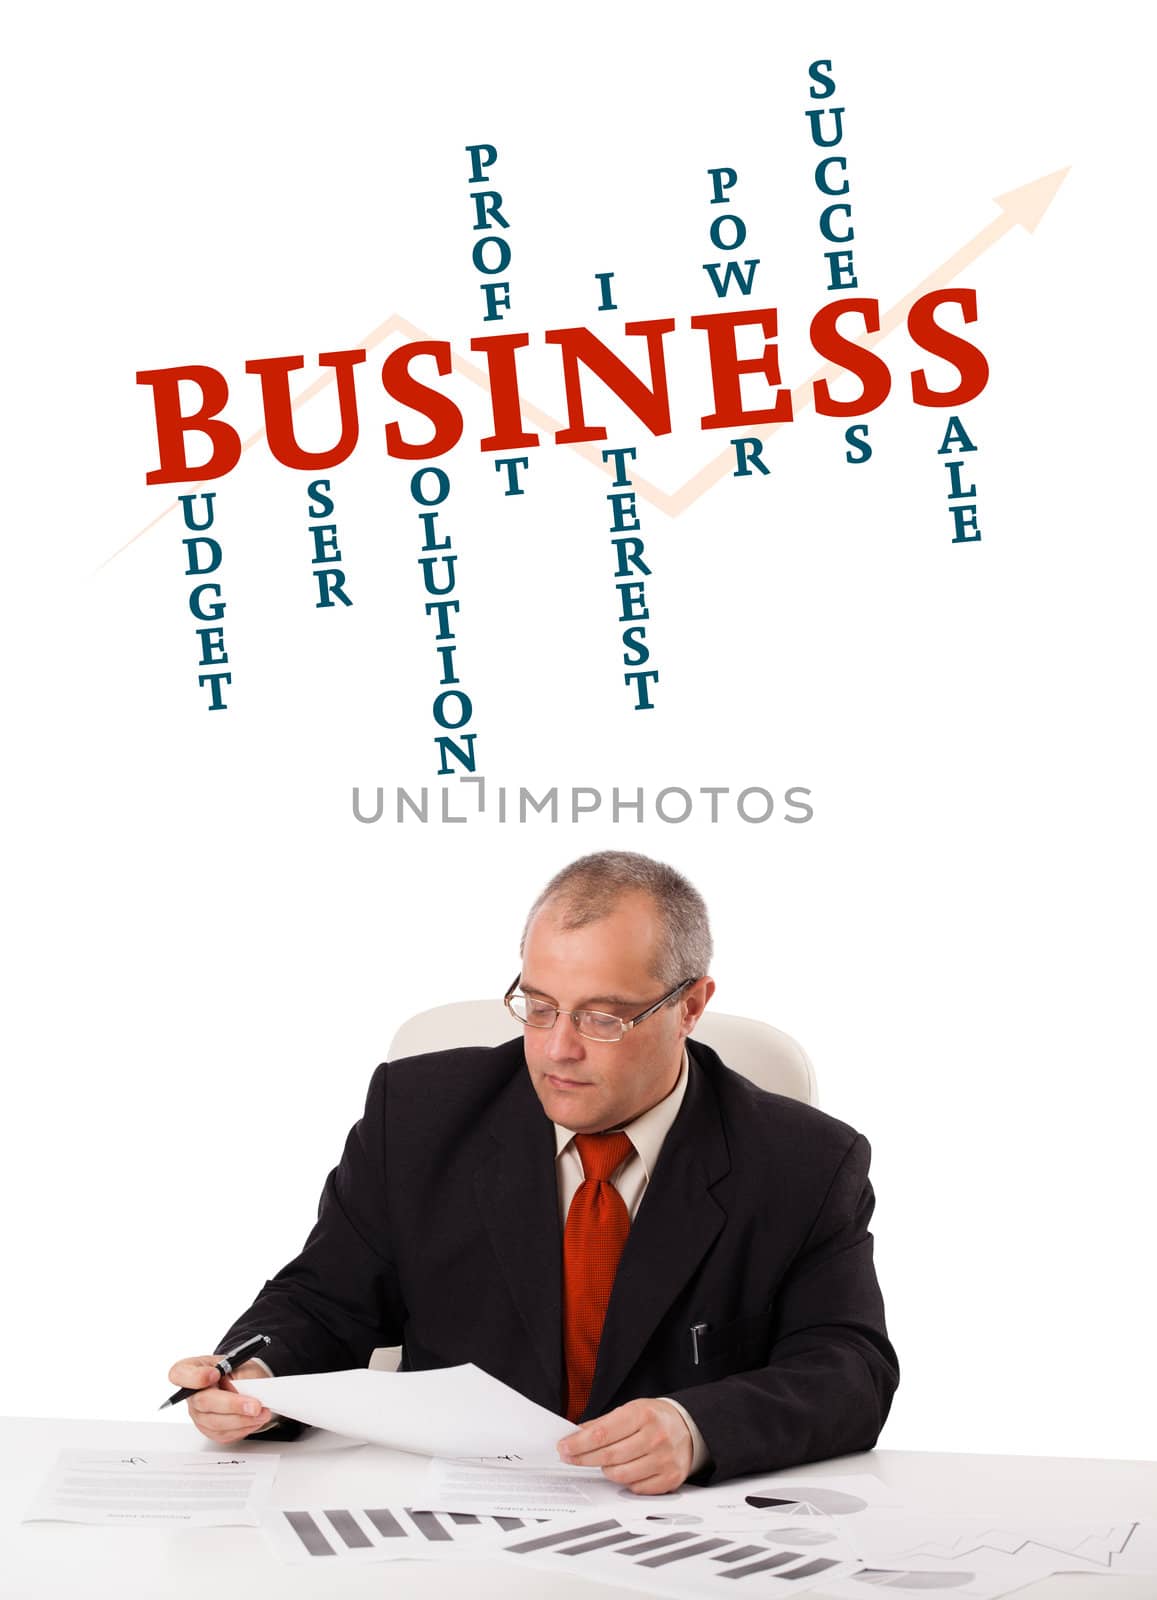 businessman sitting at desk with word cloud by ra2studio